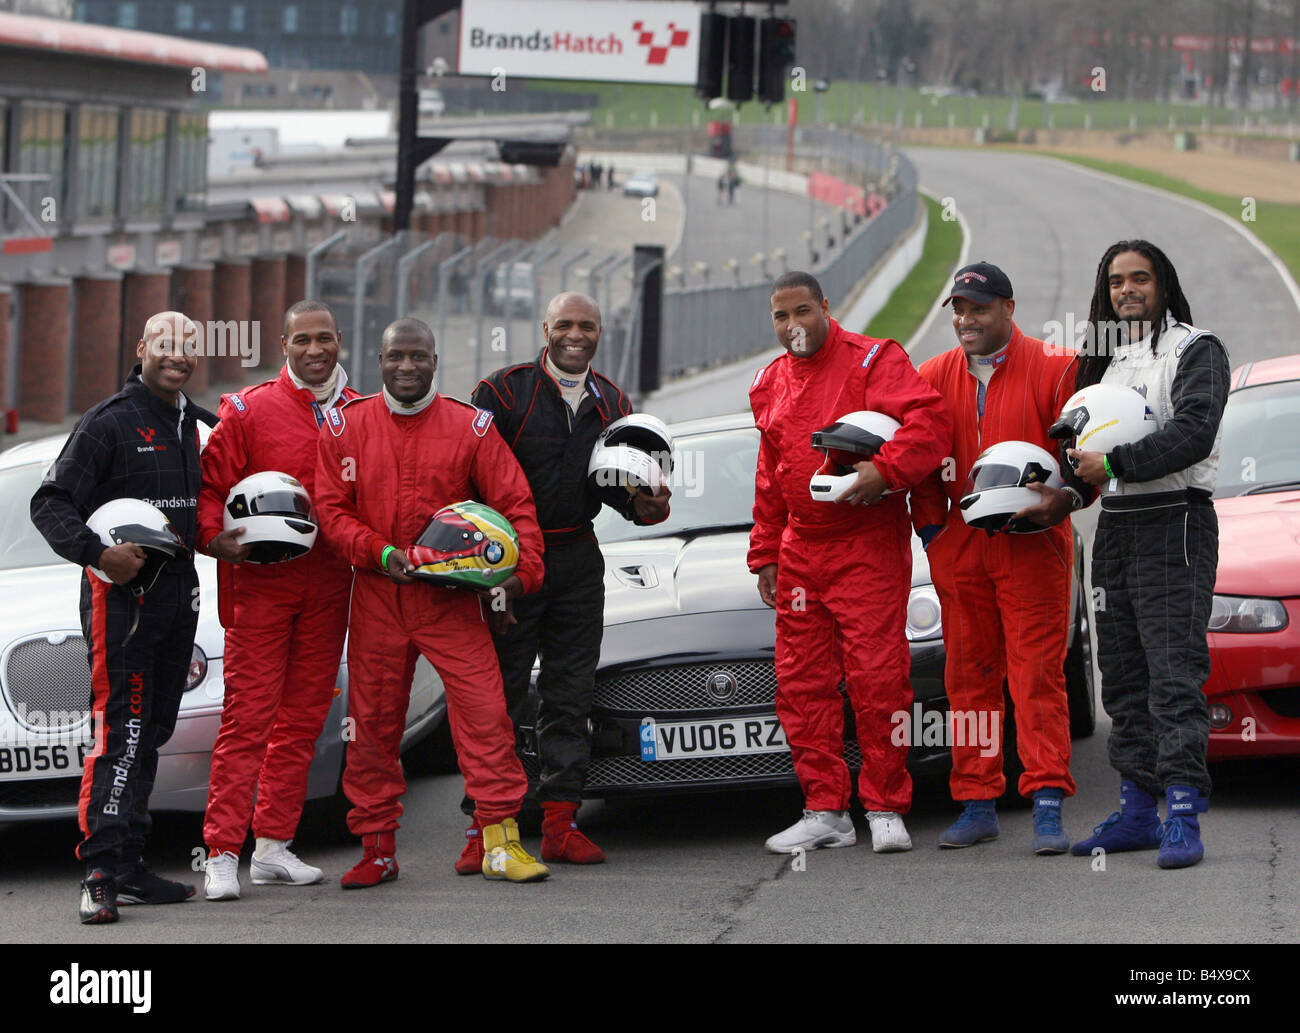 29.1.07: Drivers, including ex footballers, try out for the first Caribbeen Racing Team at Brands Hatch today. L-R Tony Chambers, Les Ferdinand, Raun Austin, Luther Blissett, John Barnes, Winston Graham and Olevi Doctrove.;Mike Moore Stock Photo